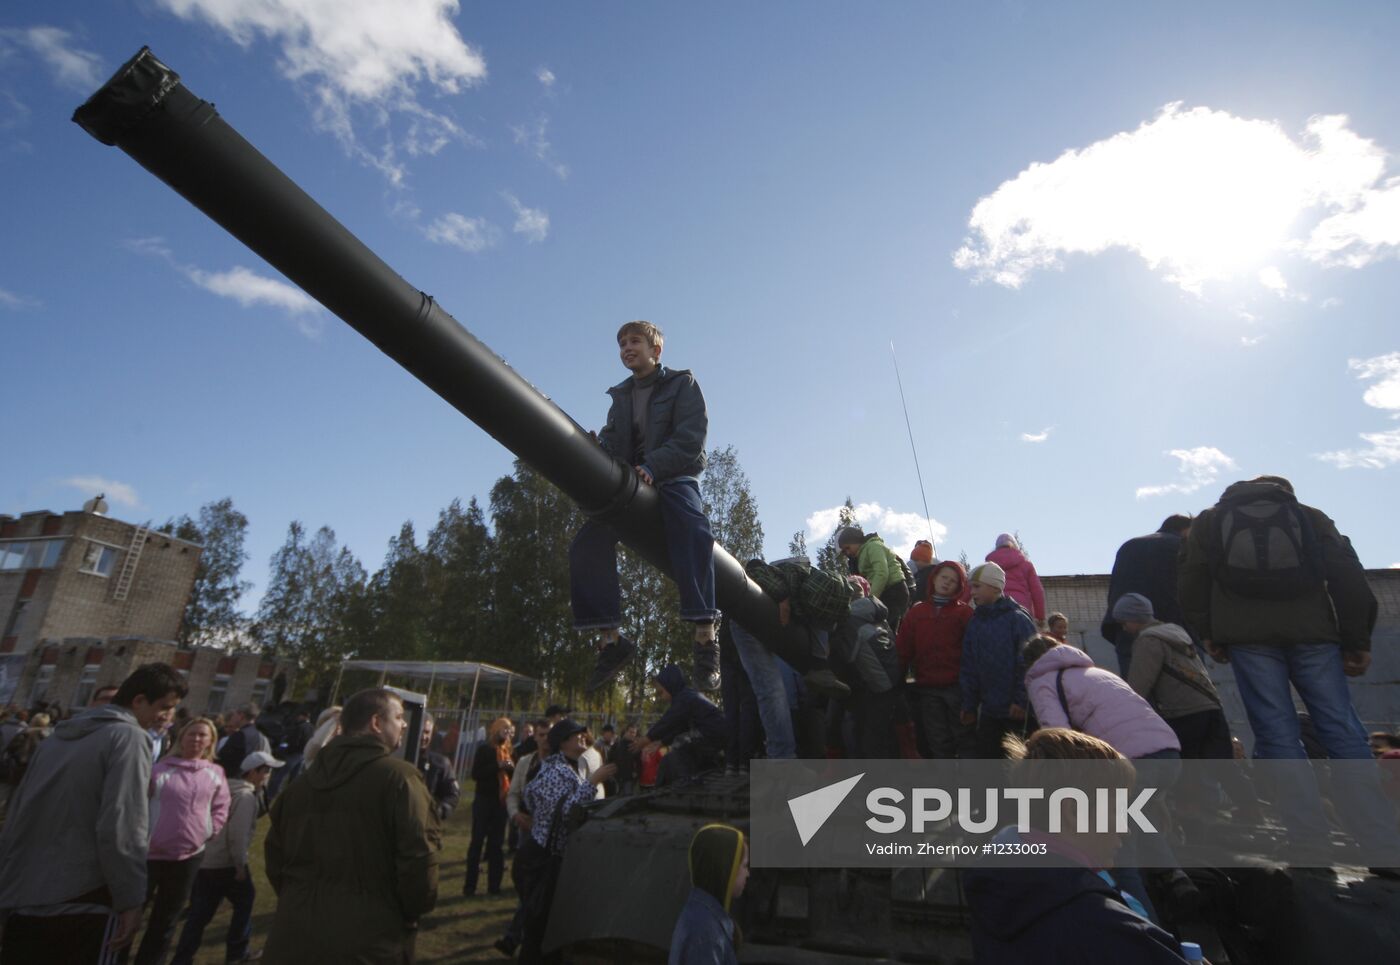 Tank show to mark Tanker's Day